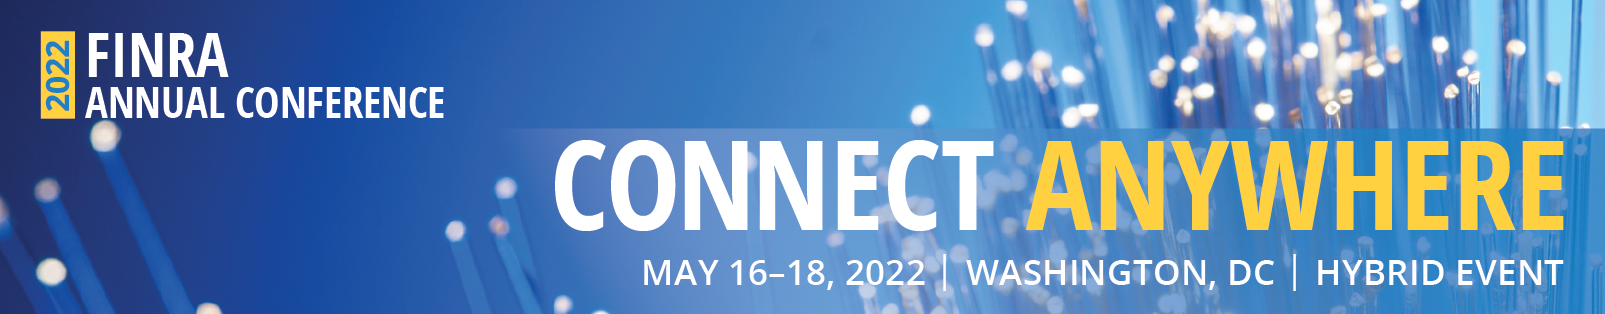 2022 FINRA Annual Conference | May 16-18 | Washington, DC